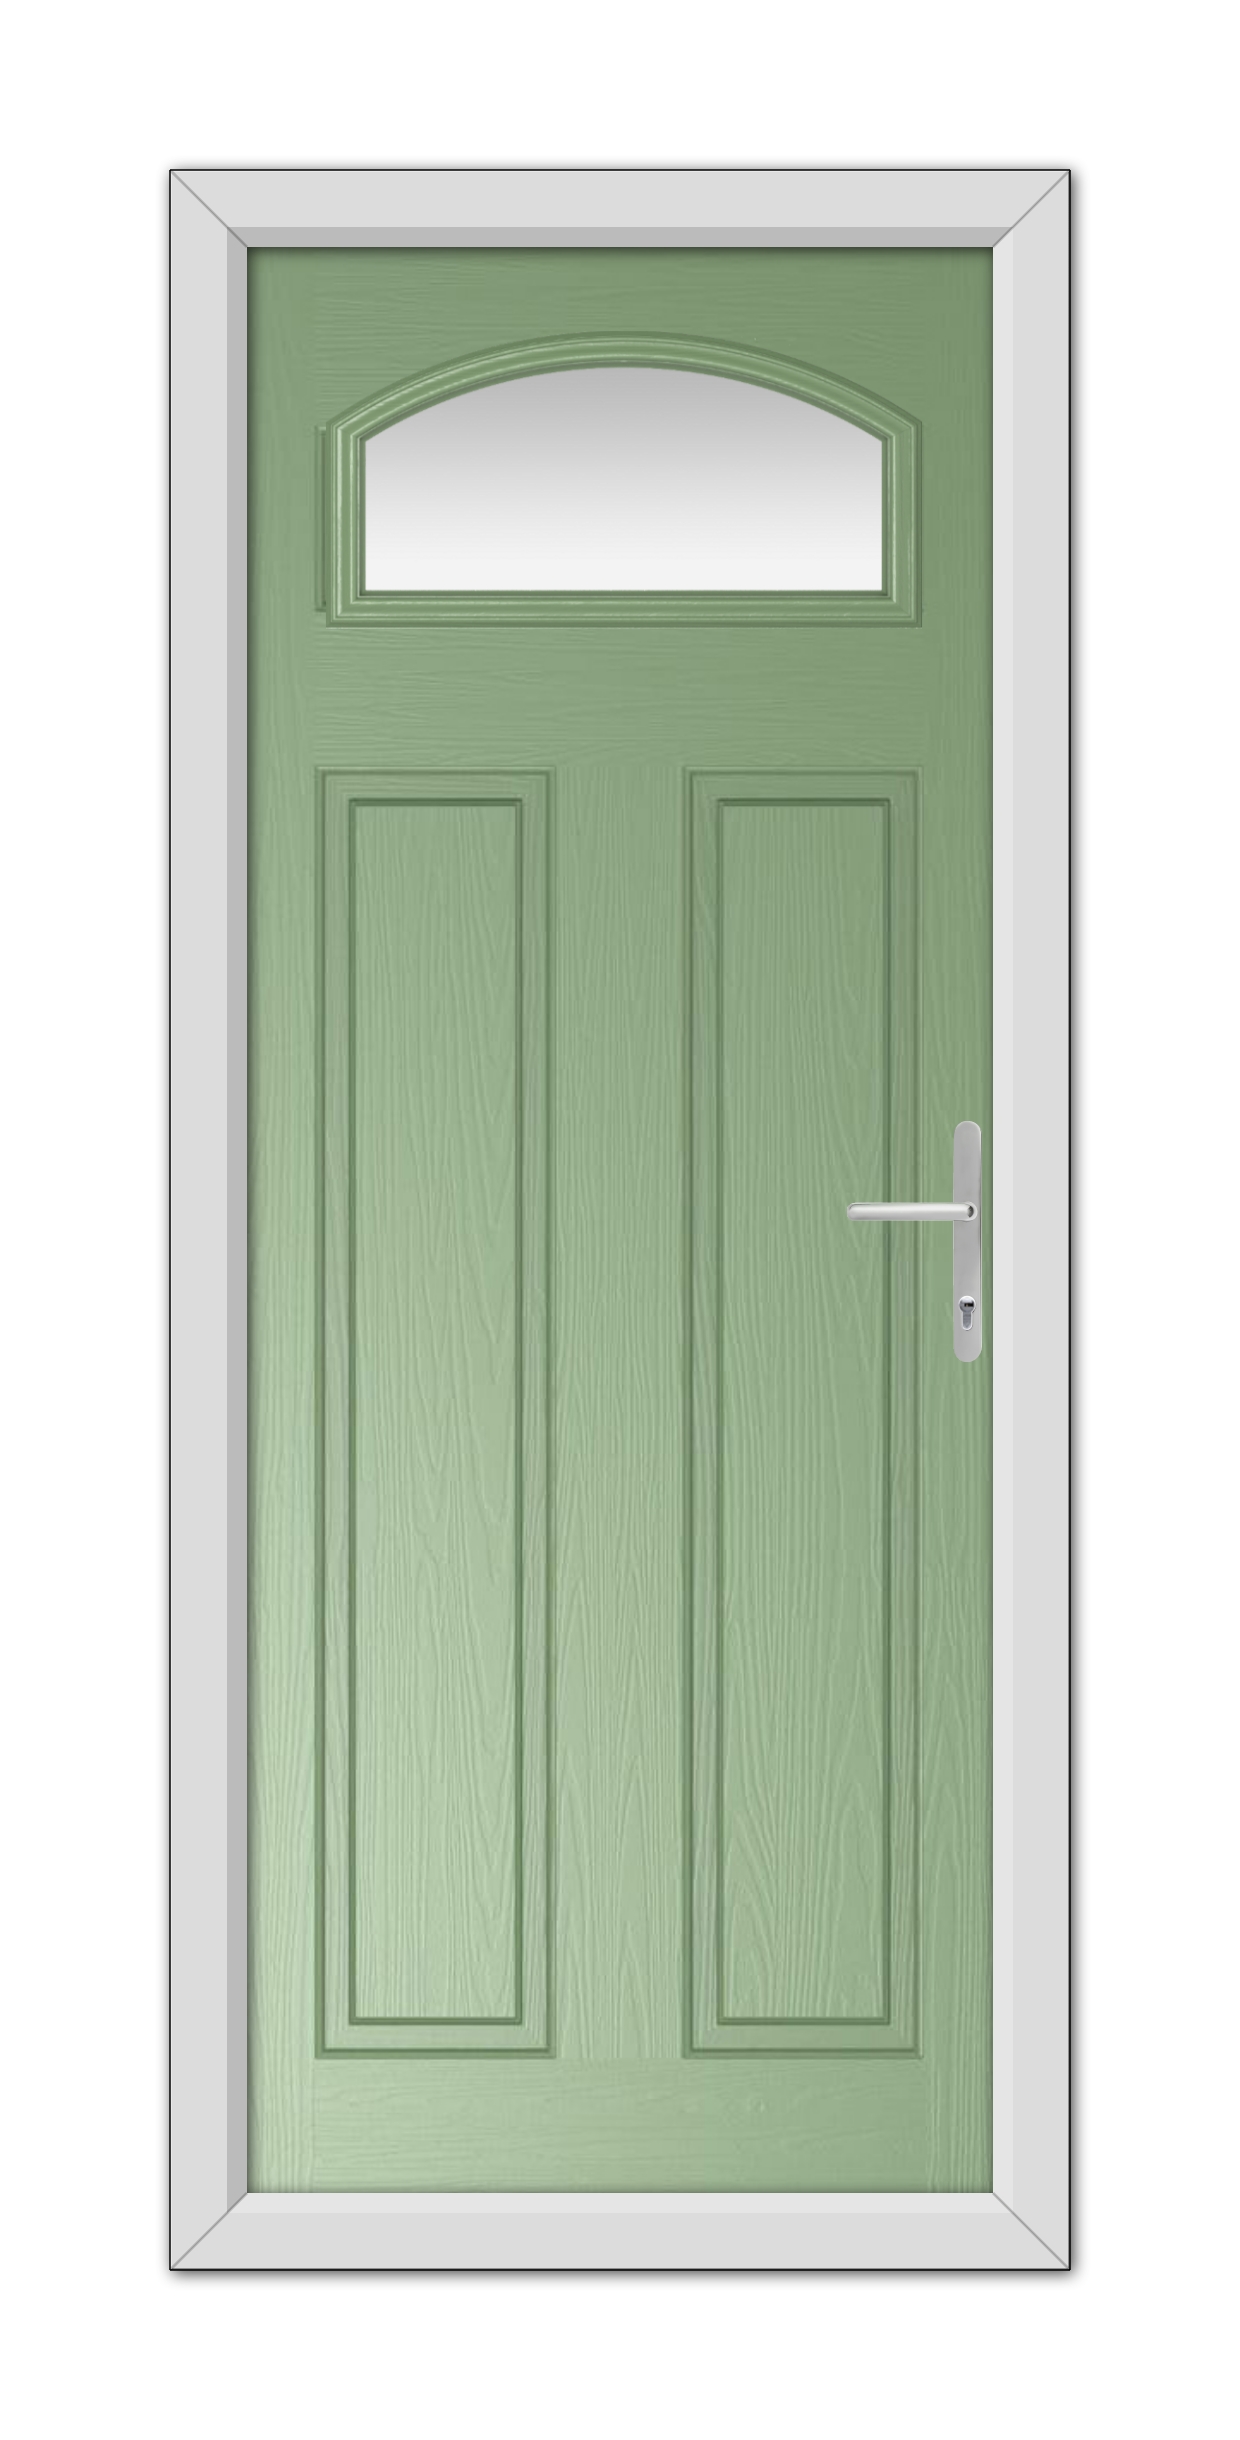 A Chartwell Green Harlington Composite door with a semi-circular window at the top, framed within a white door frame, featuring a modern handle.